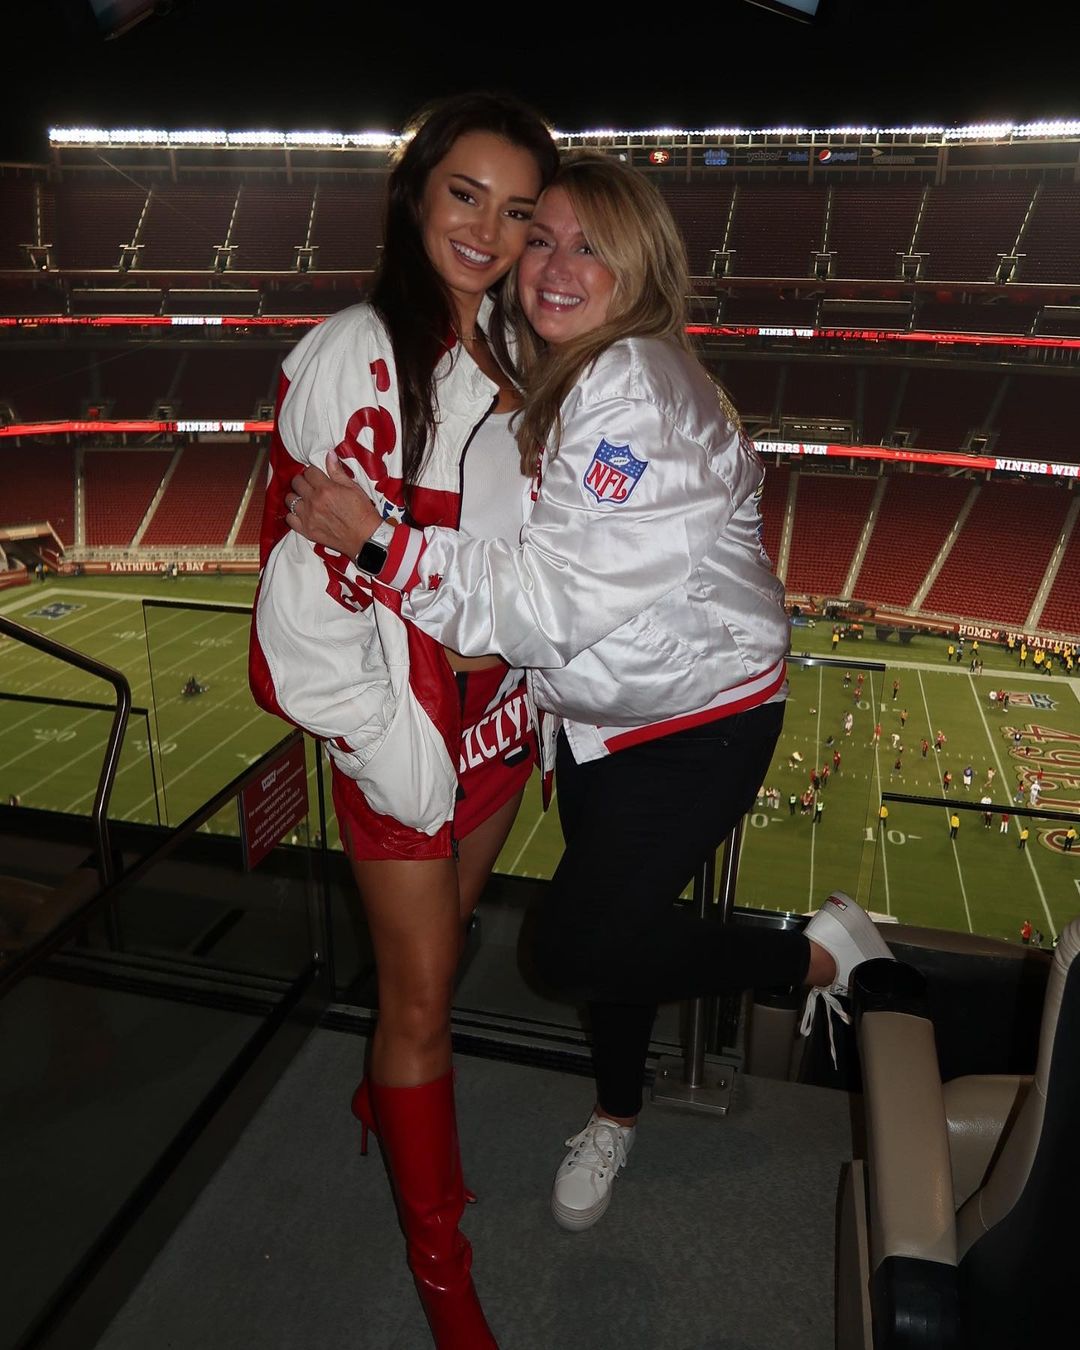 Kristin Juszczyk is the Wag Going Viral Thanks to Taylor Swift! - Photo 13